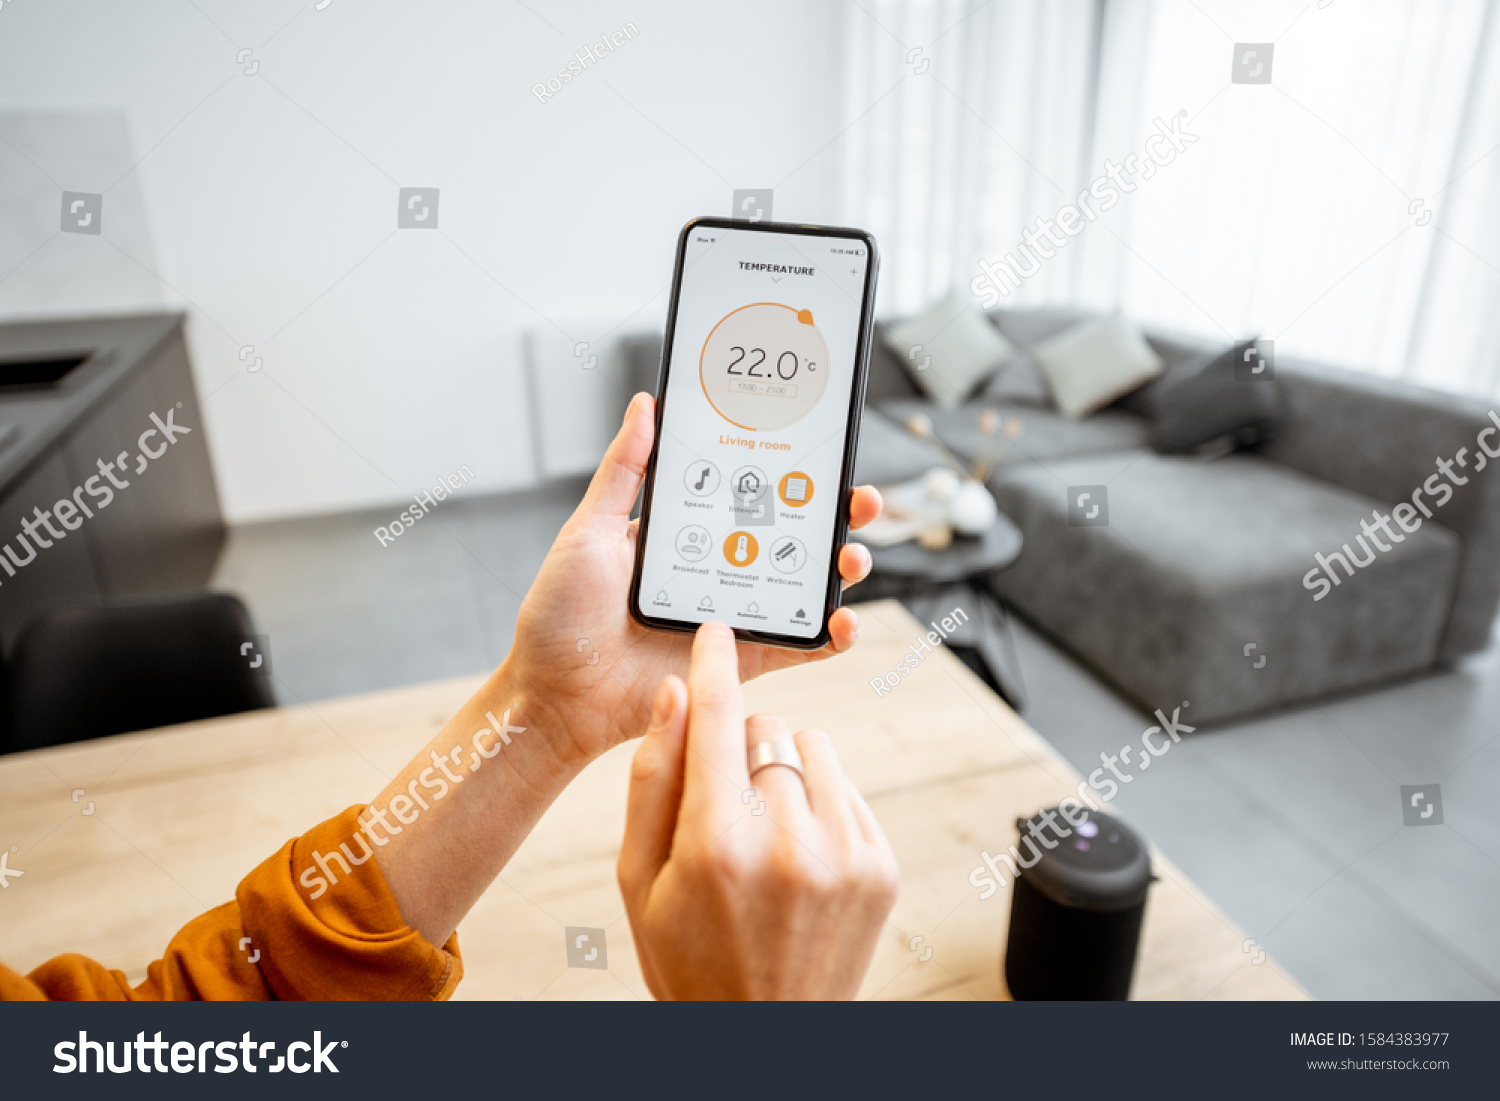 Controlling home heating temperature with a smart home, close-up on phone. Concept of a smart home and mobile application for managing smart devices at home #1584383977